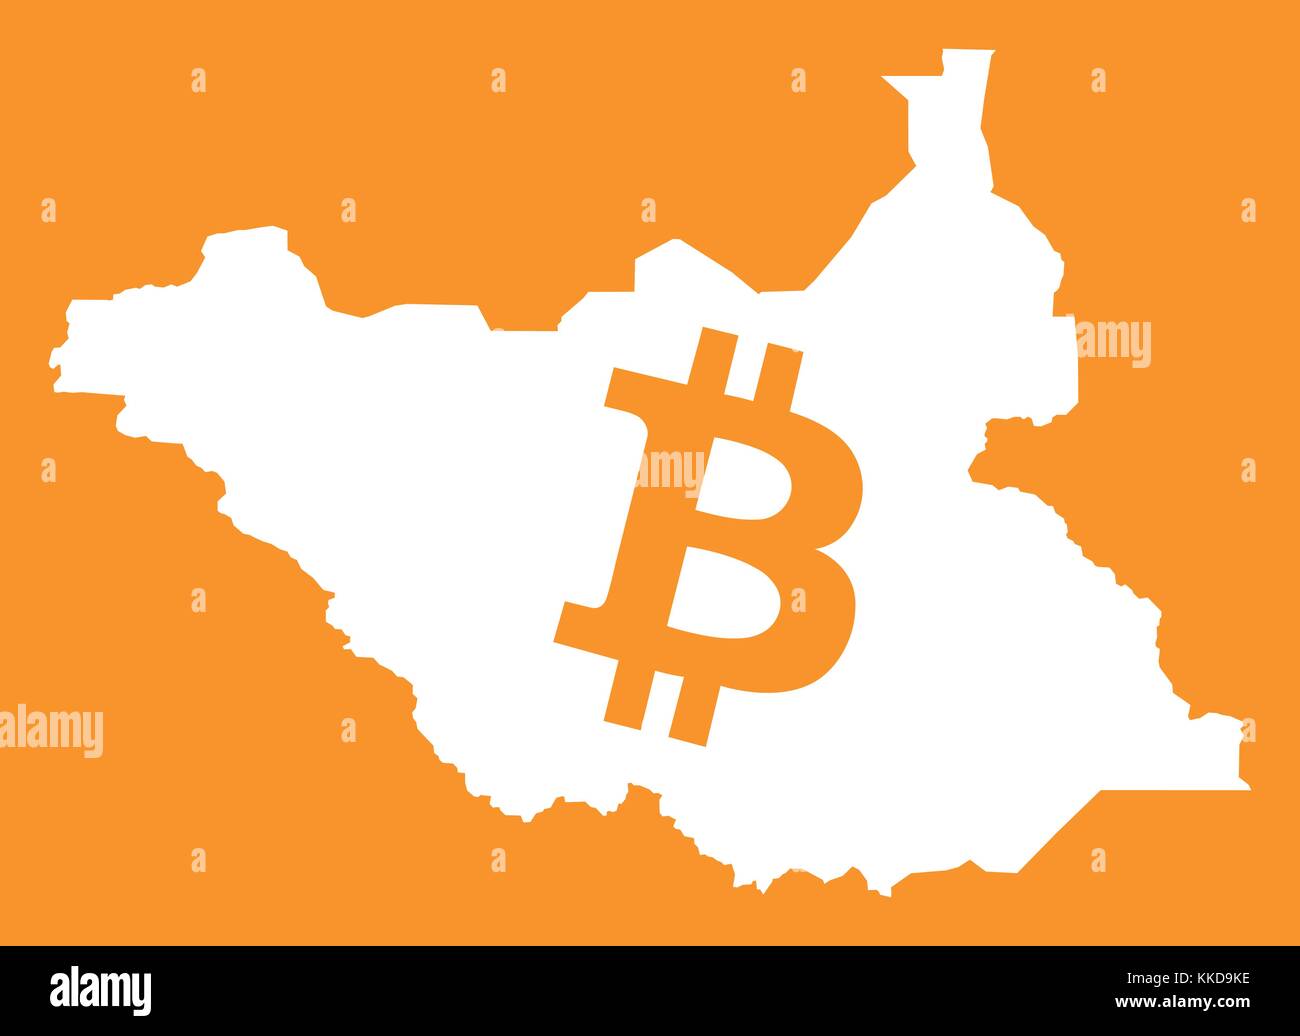 South Sudan map with bitcoin crypto currency symbol illustration Stock Vector